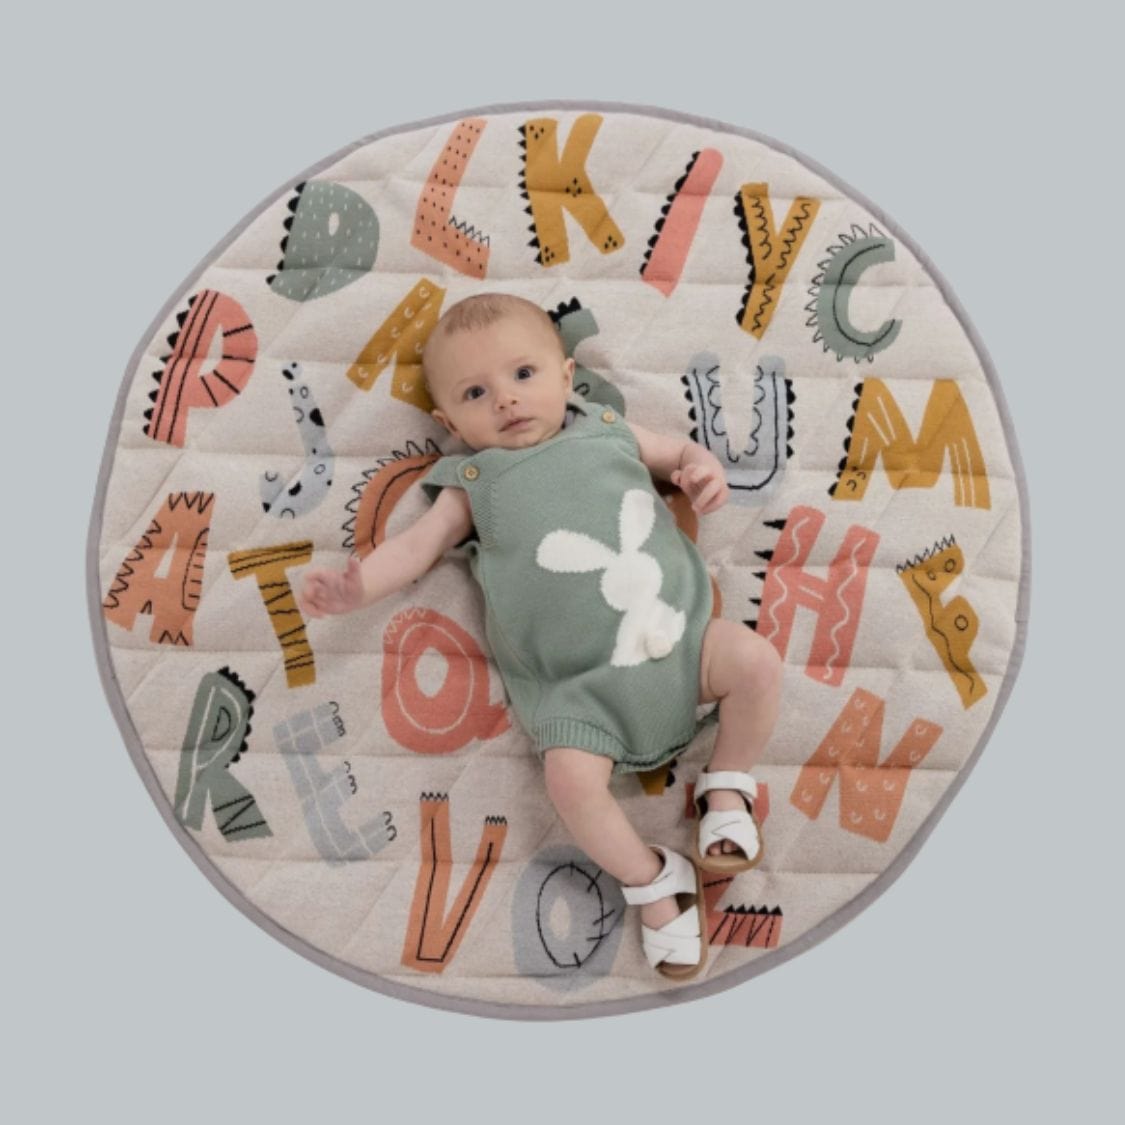 Di Lusso Living Padded ABC Playmat 100% Cotton 90cm-Playmats and Gym-soul-baby-gifts-90cm diameter-